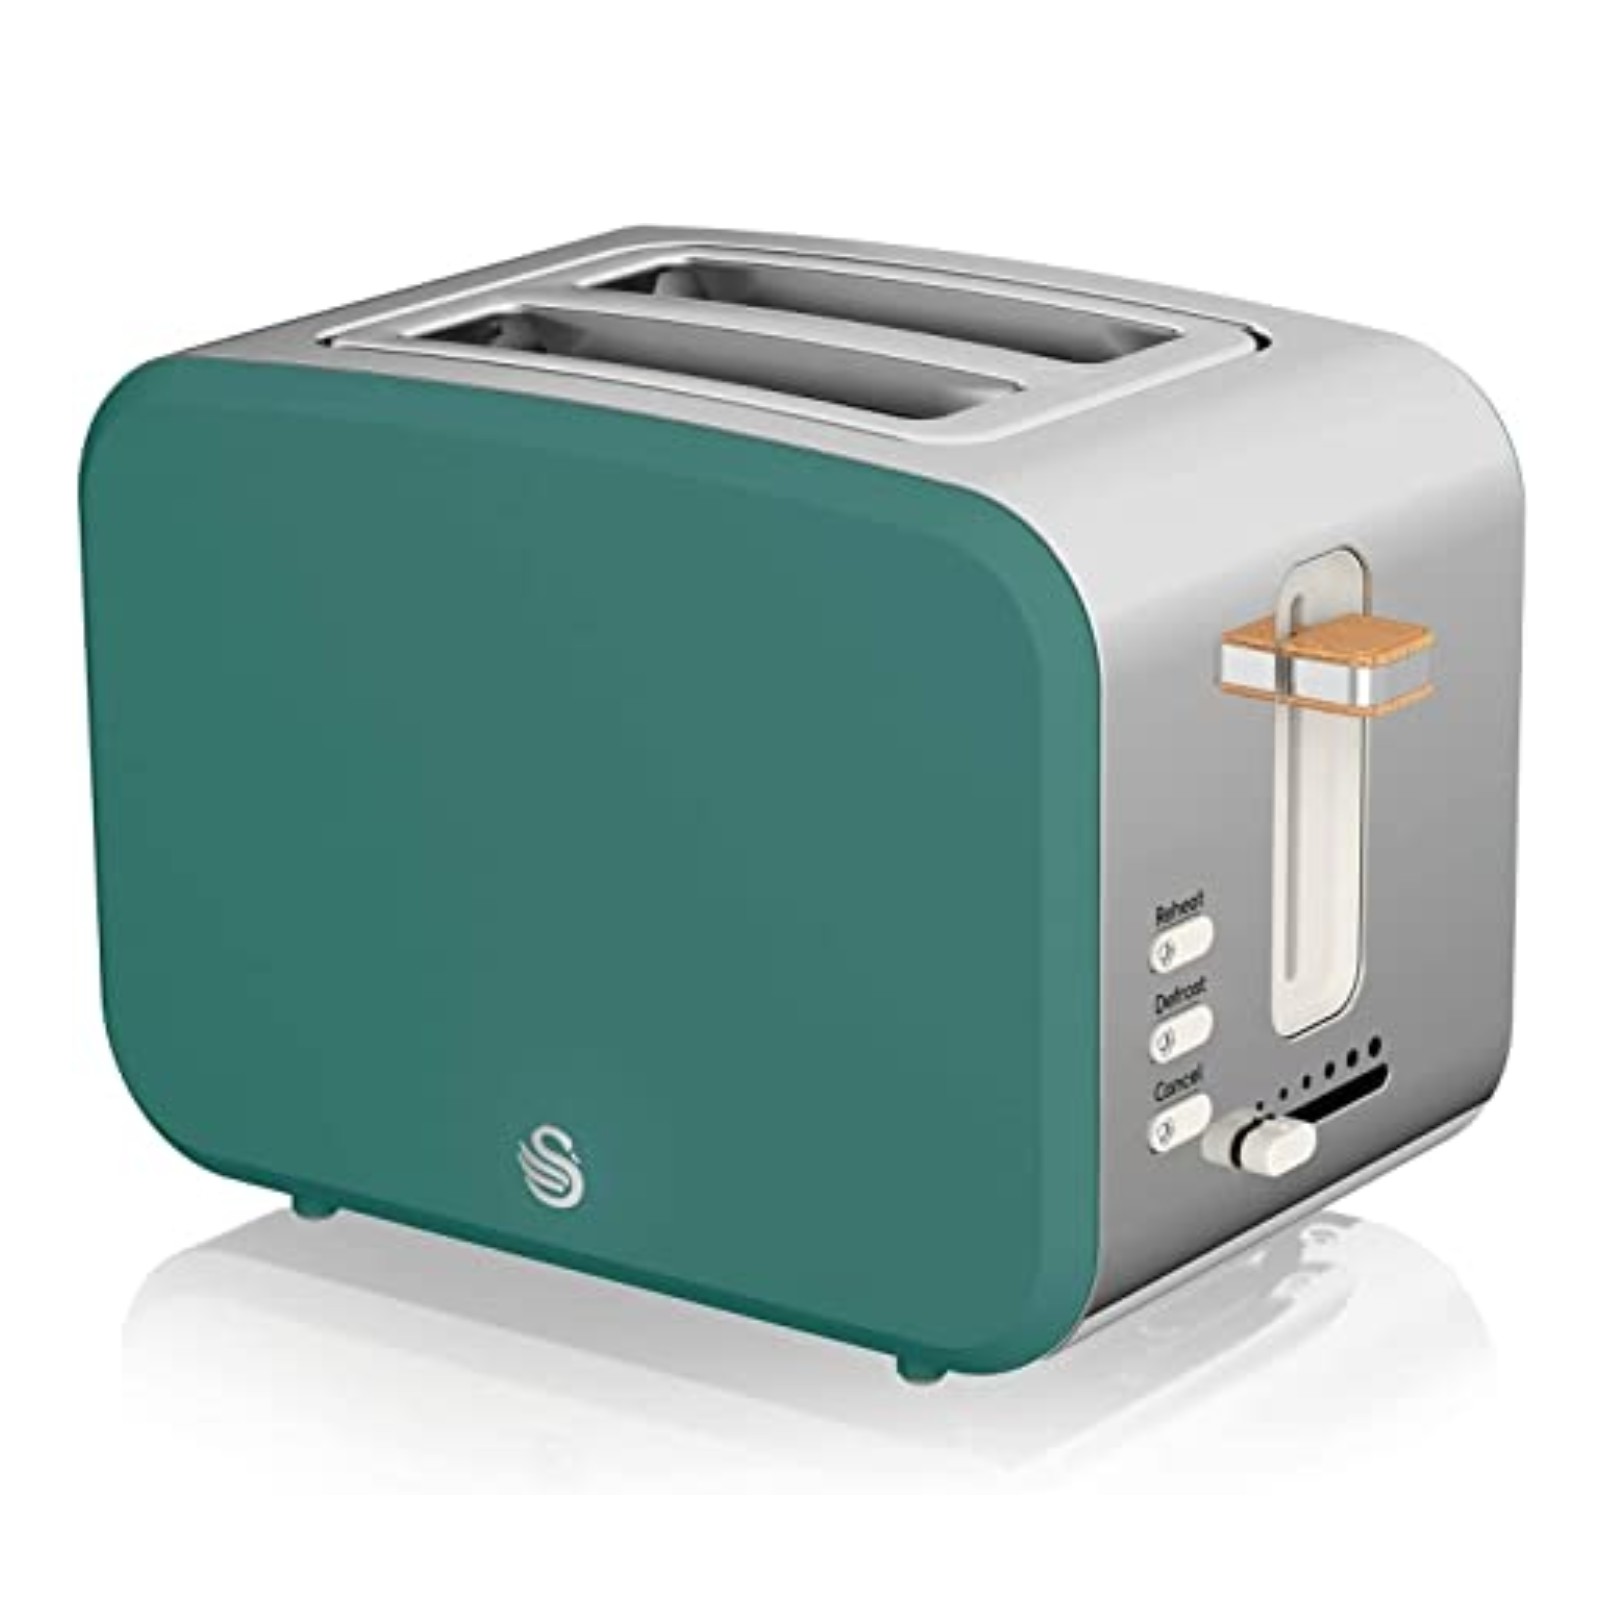 2 SLICE NORDIC TOASTER ST14610GREN - Kettle and Toaster Man